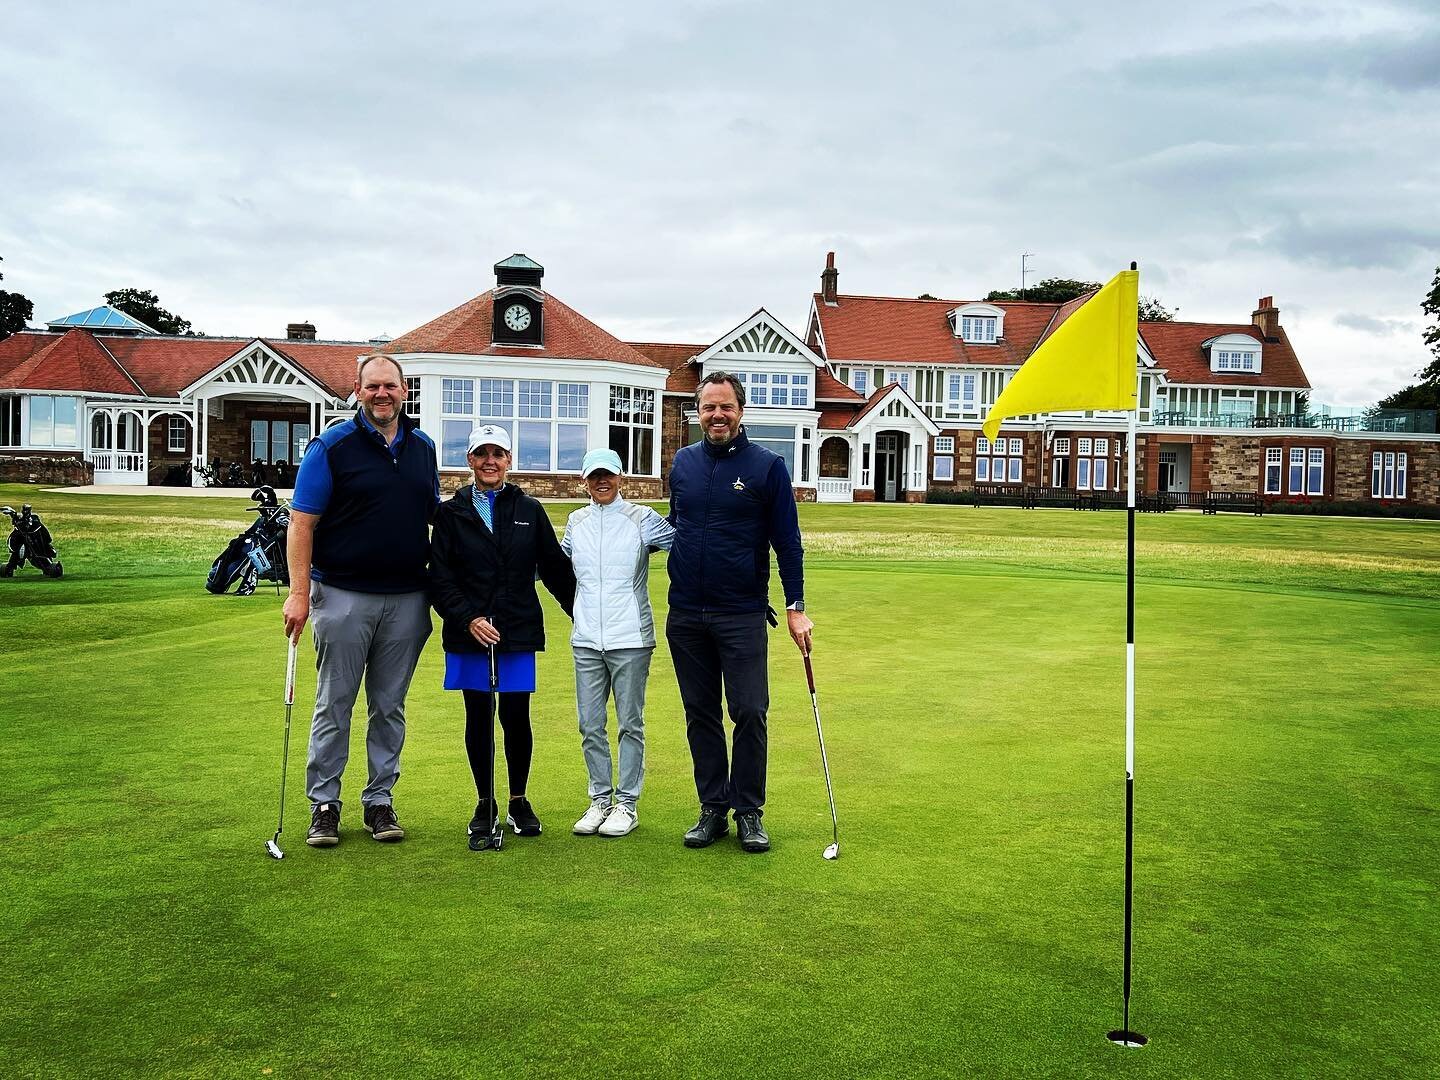 Andy and I were delighted to play with two of our guests Kris and Kim at Muirfield. We enjoyed a full day of golf with 18 holes of fourball in the morning , a top notch lunch and 18 holes of foursomes in the afternoon. One of the best days in golf! ?